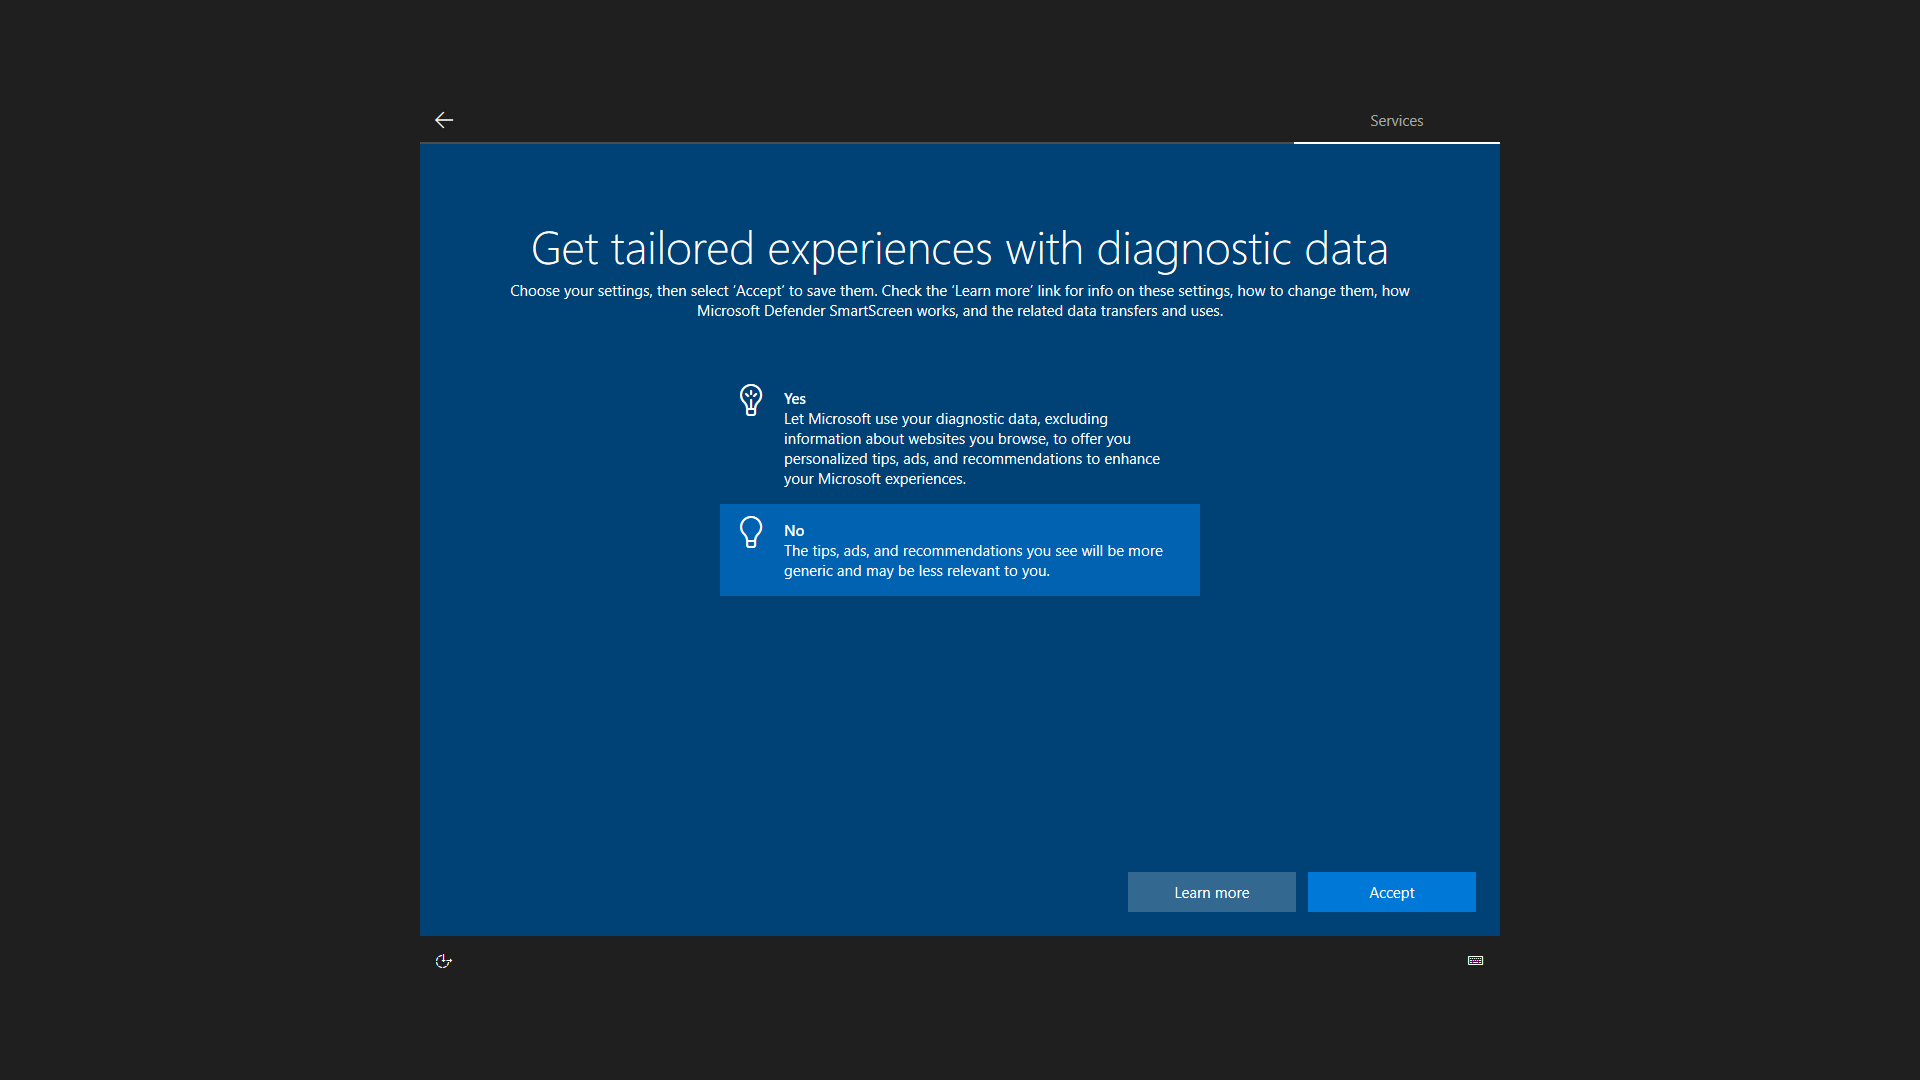 Tailored experiences query screen during Windows setup